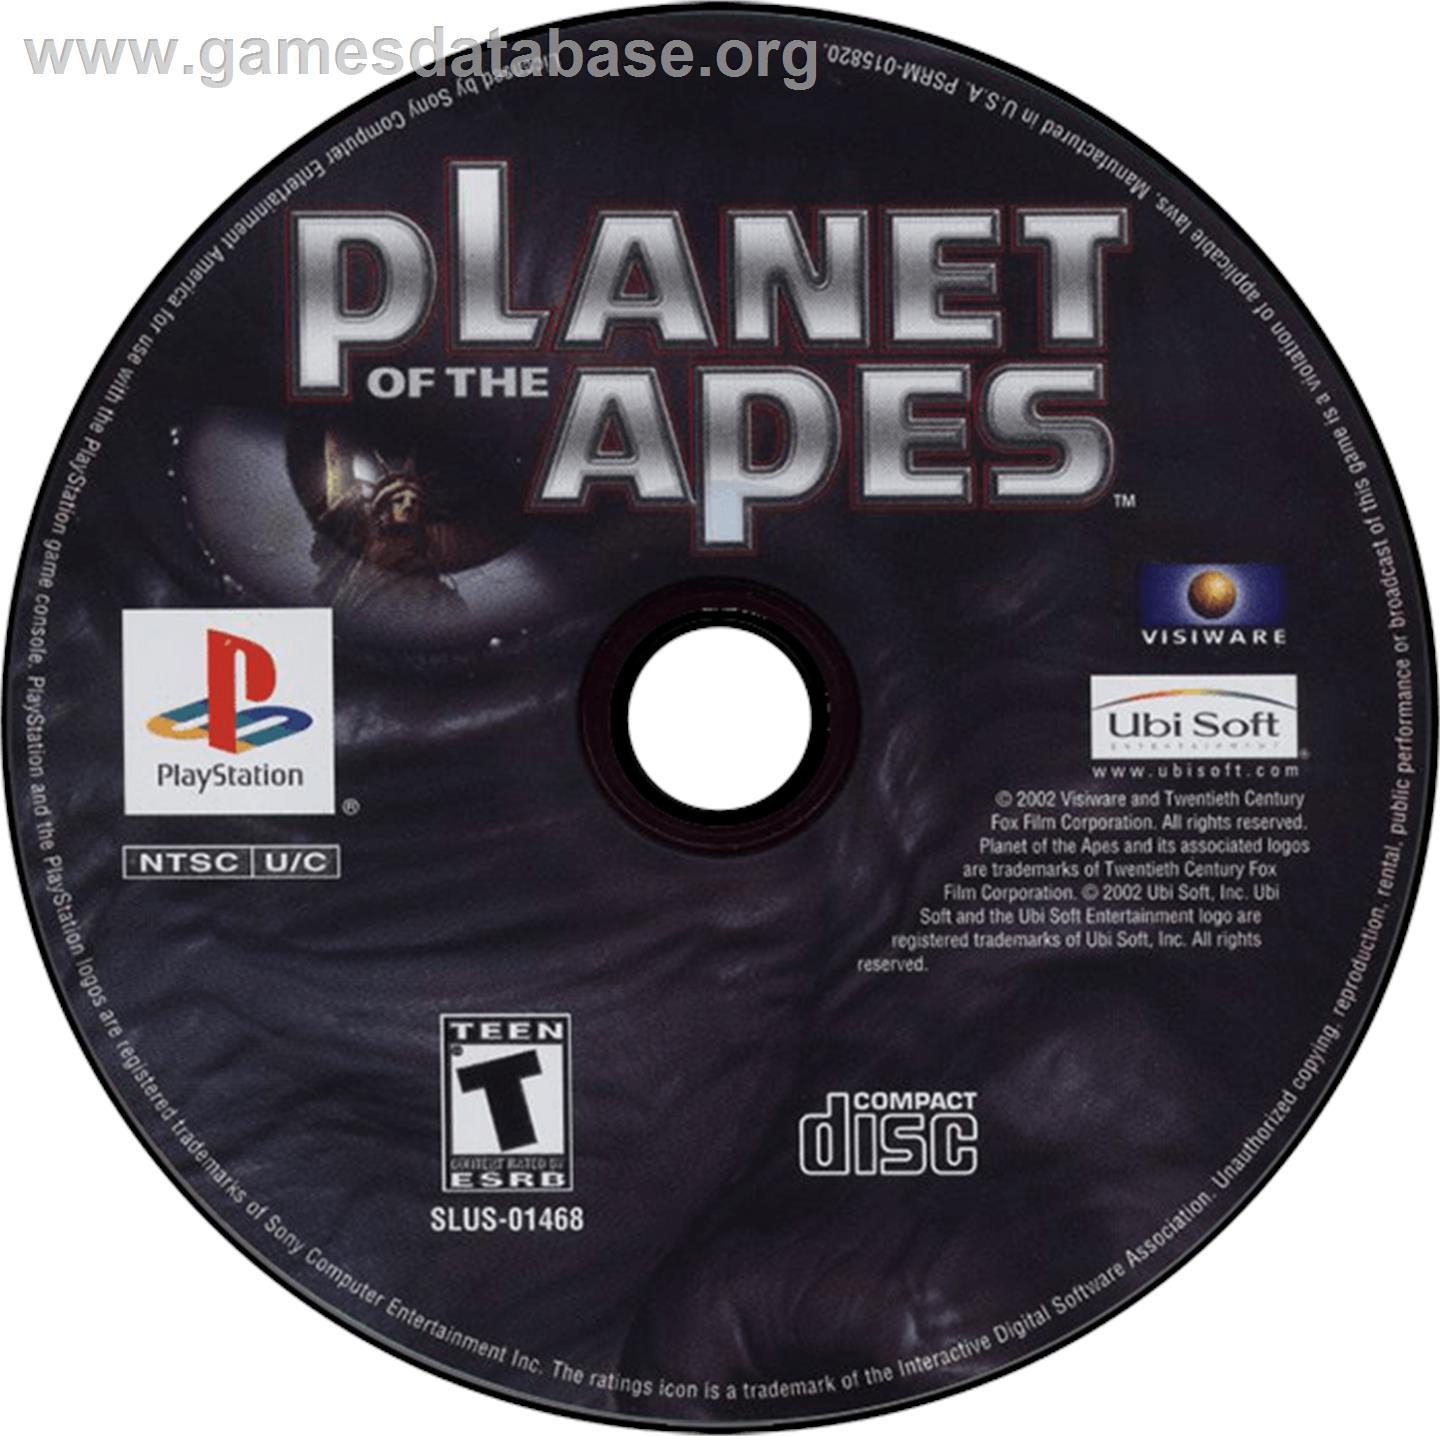 Planet of the Apes - Sony Playstation - Artwork - Disc